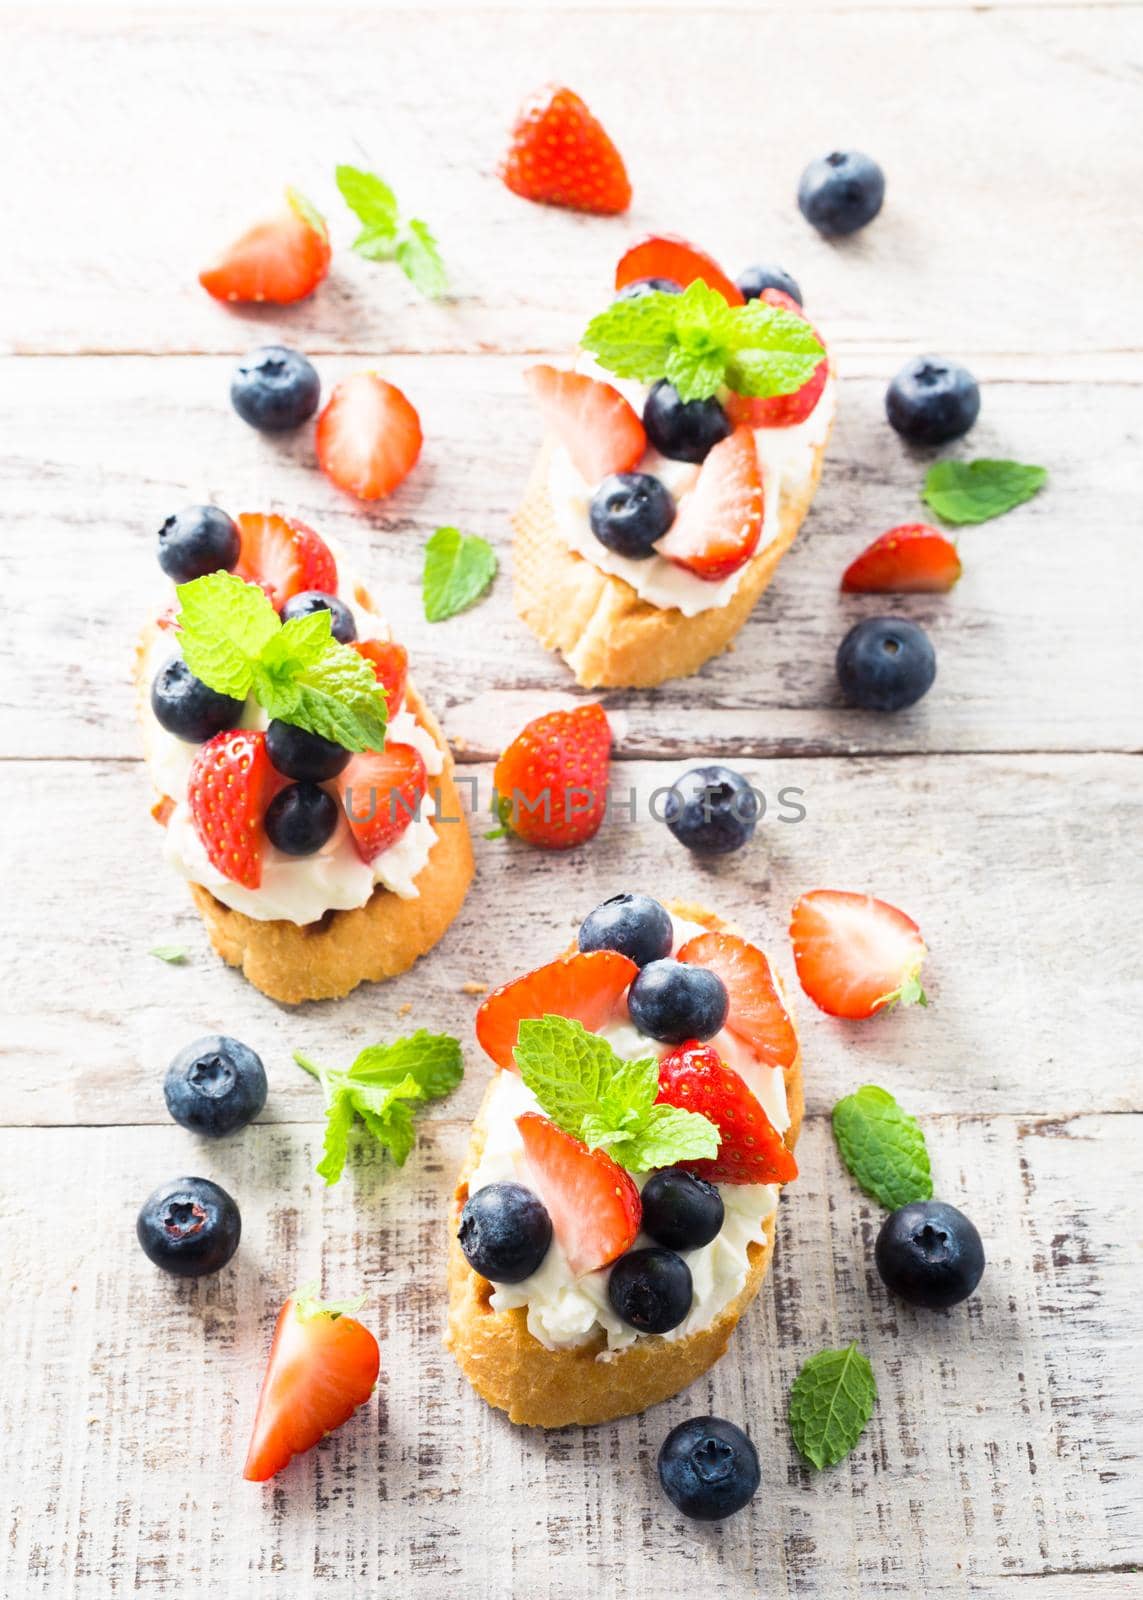 Small canape, crostini with grilled baguette with cream cheese, blueberry, strawberry and mint on old white wooden background. Delicious appetizer or dessert.